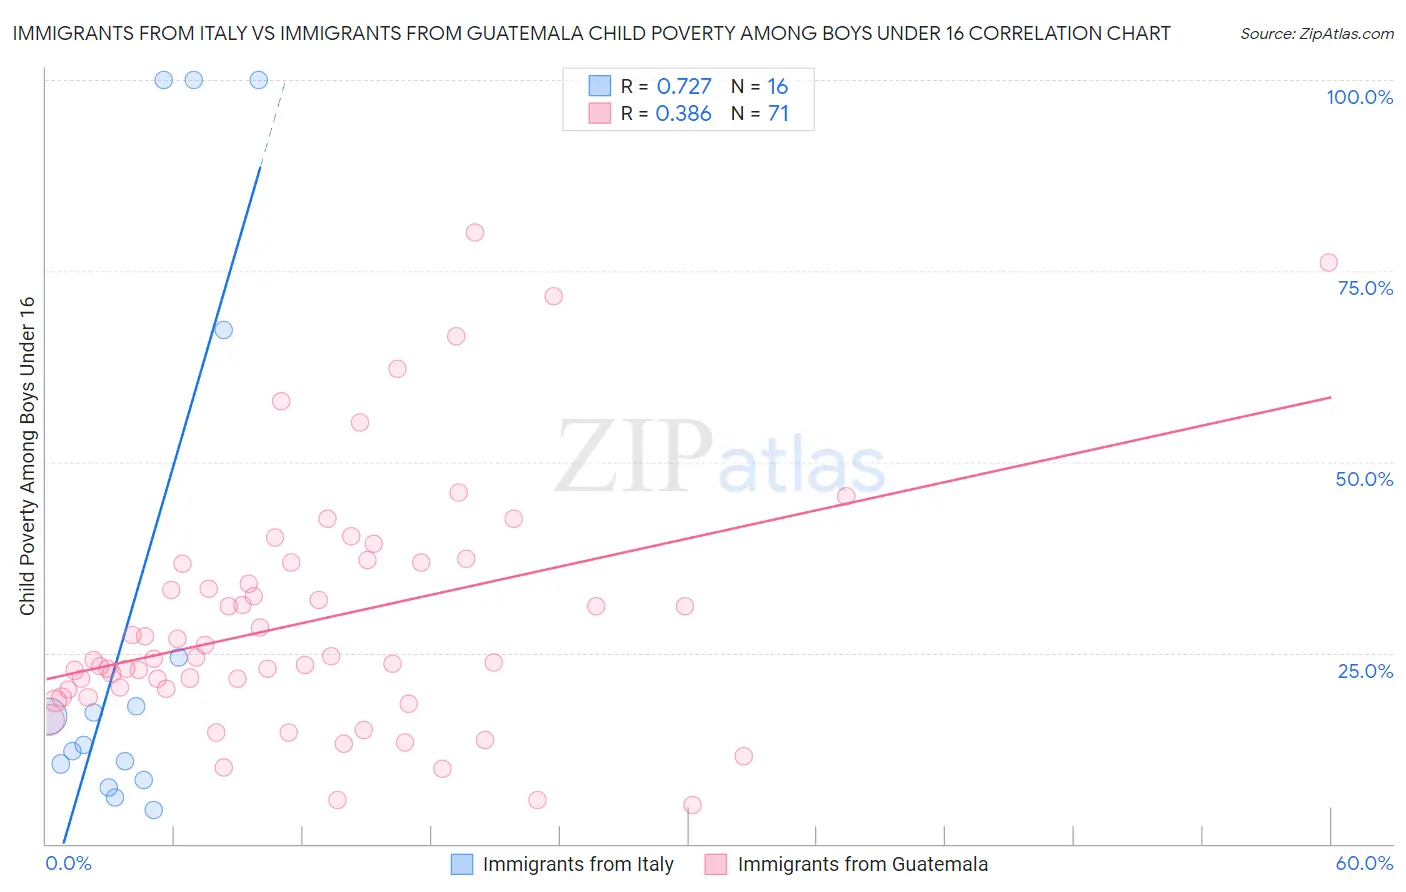 Immigrants from Italy vs Immigrants from Guatemala Child Poverty Among Boys Under 16